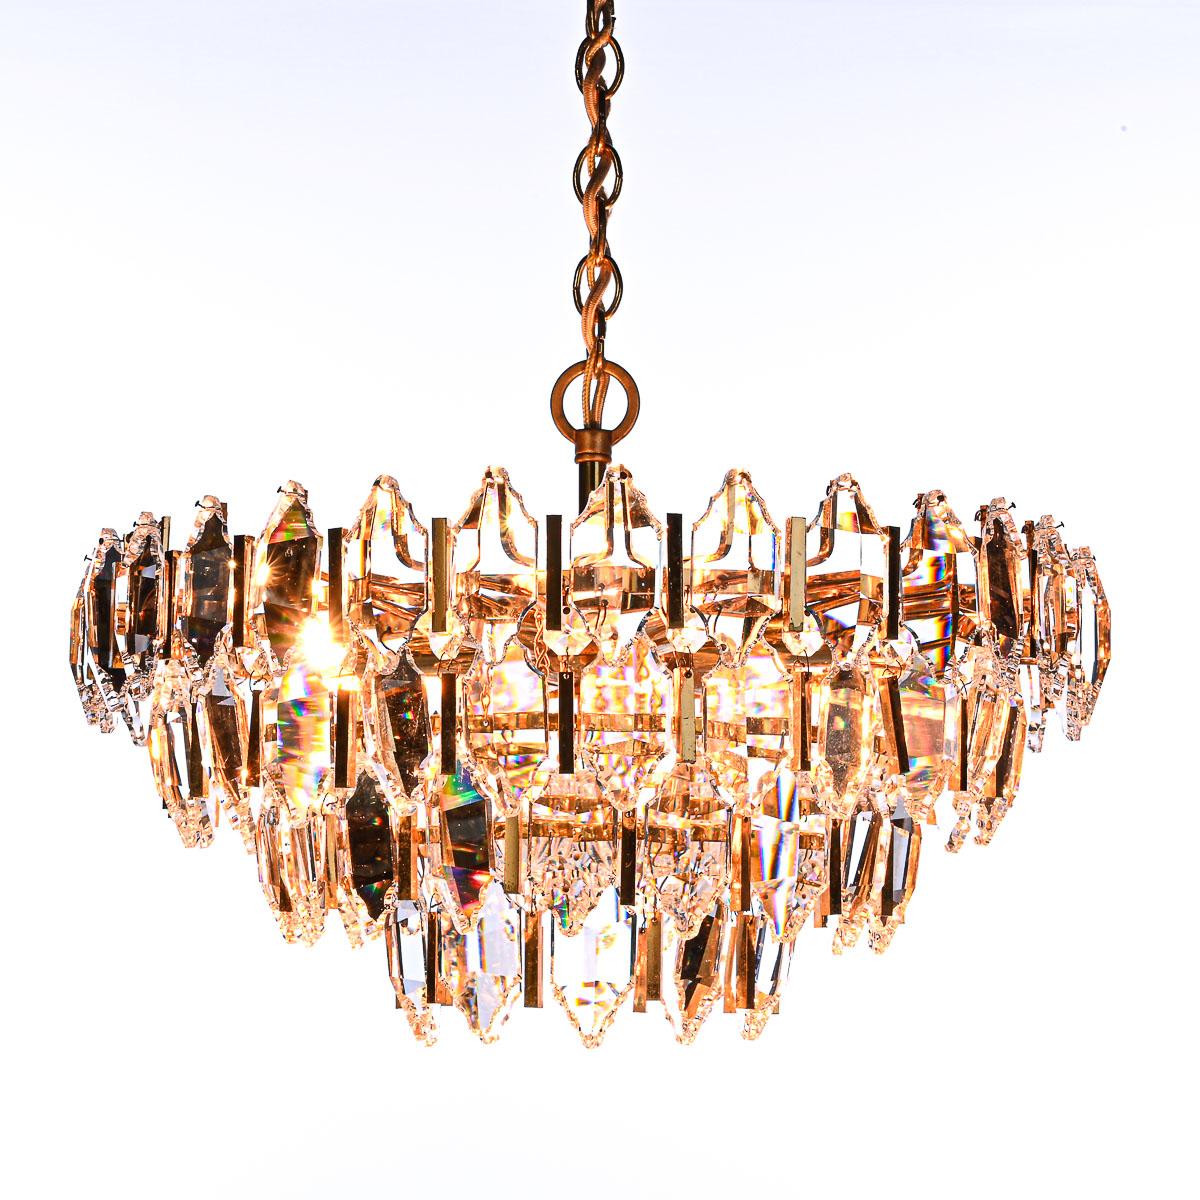 Stunning chandelier! Total of 73 large crystal glass separated with gold-plated chrome ‘bars’. The lower tiers include one crystal flake above each large crystal gem.
In the middle a glass bowl to finish it off. Six E14 lightbulbs.
The shimmer on